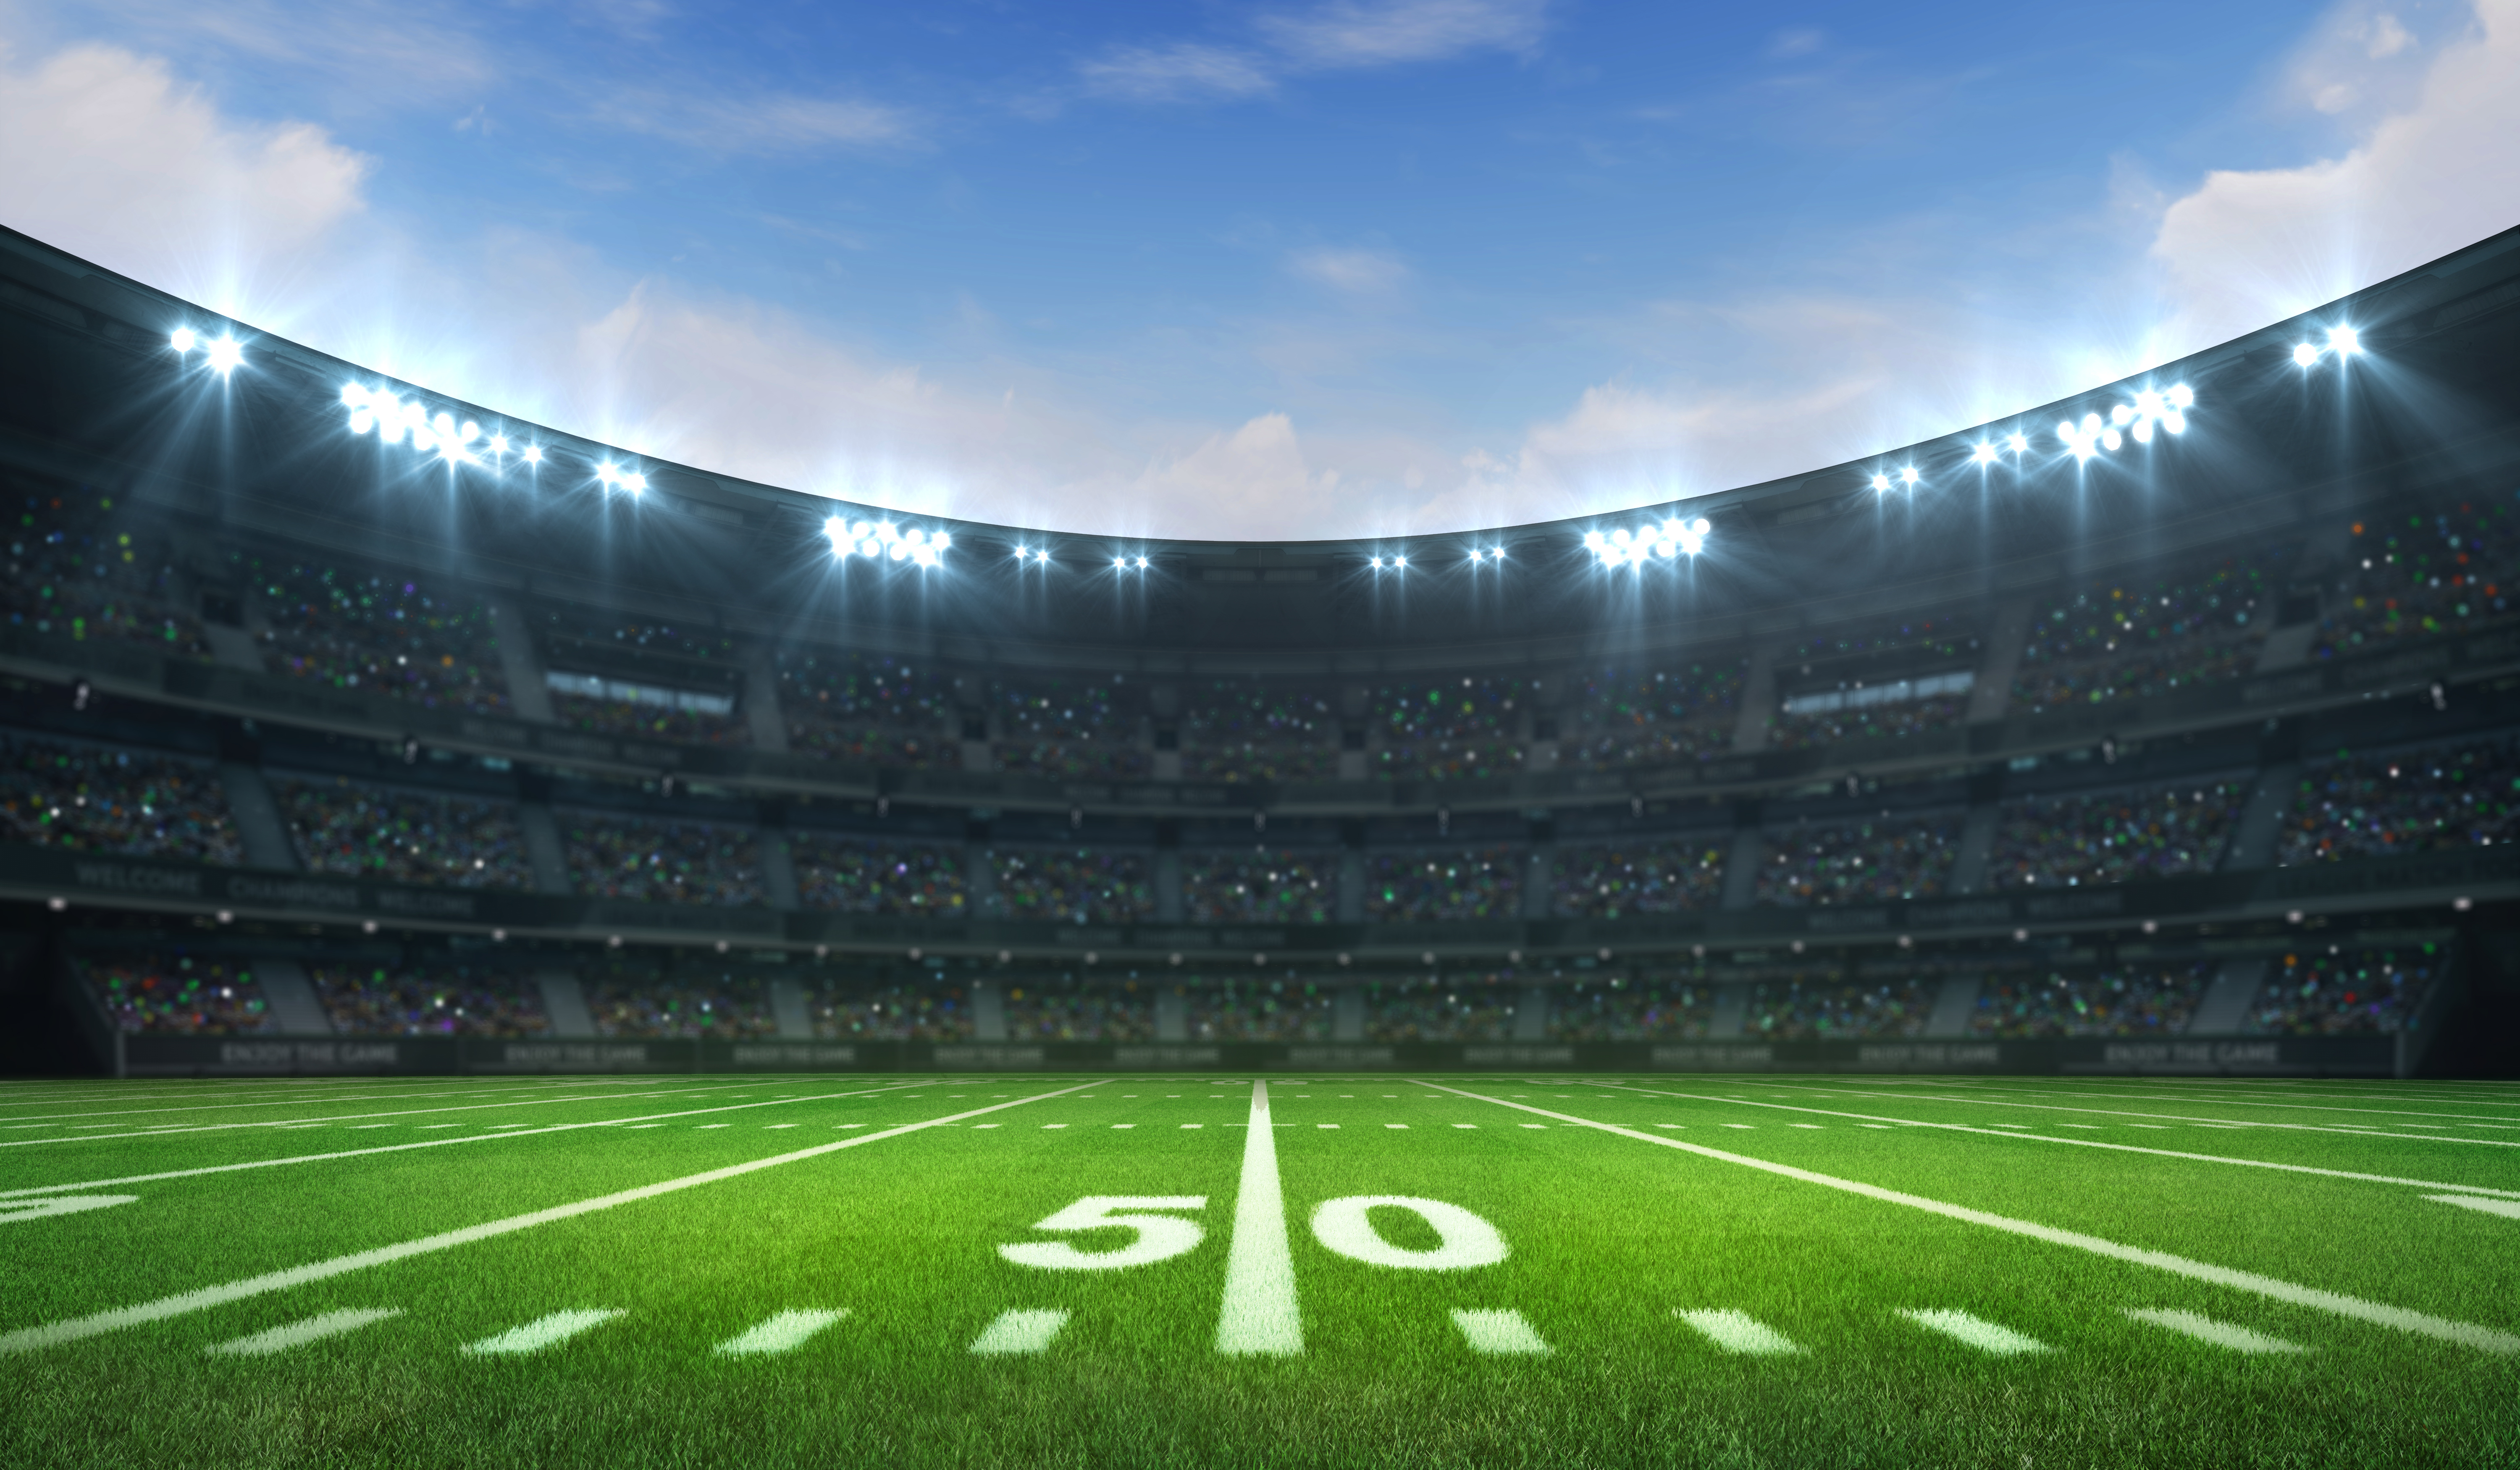 Super Bowl TV Ads Sold Out - So Now What? DOOH Has the Answers